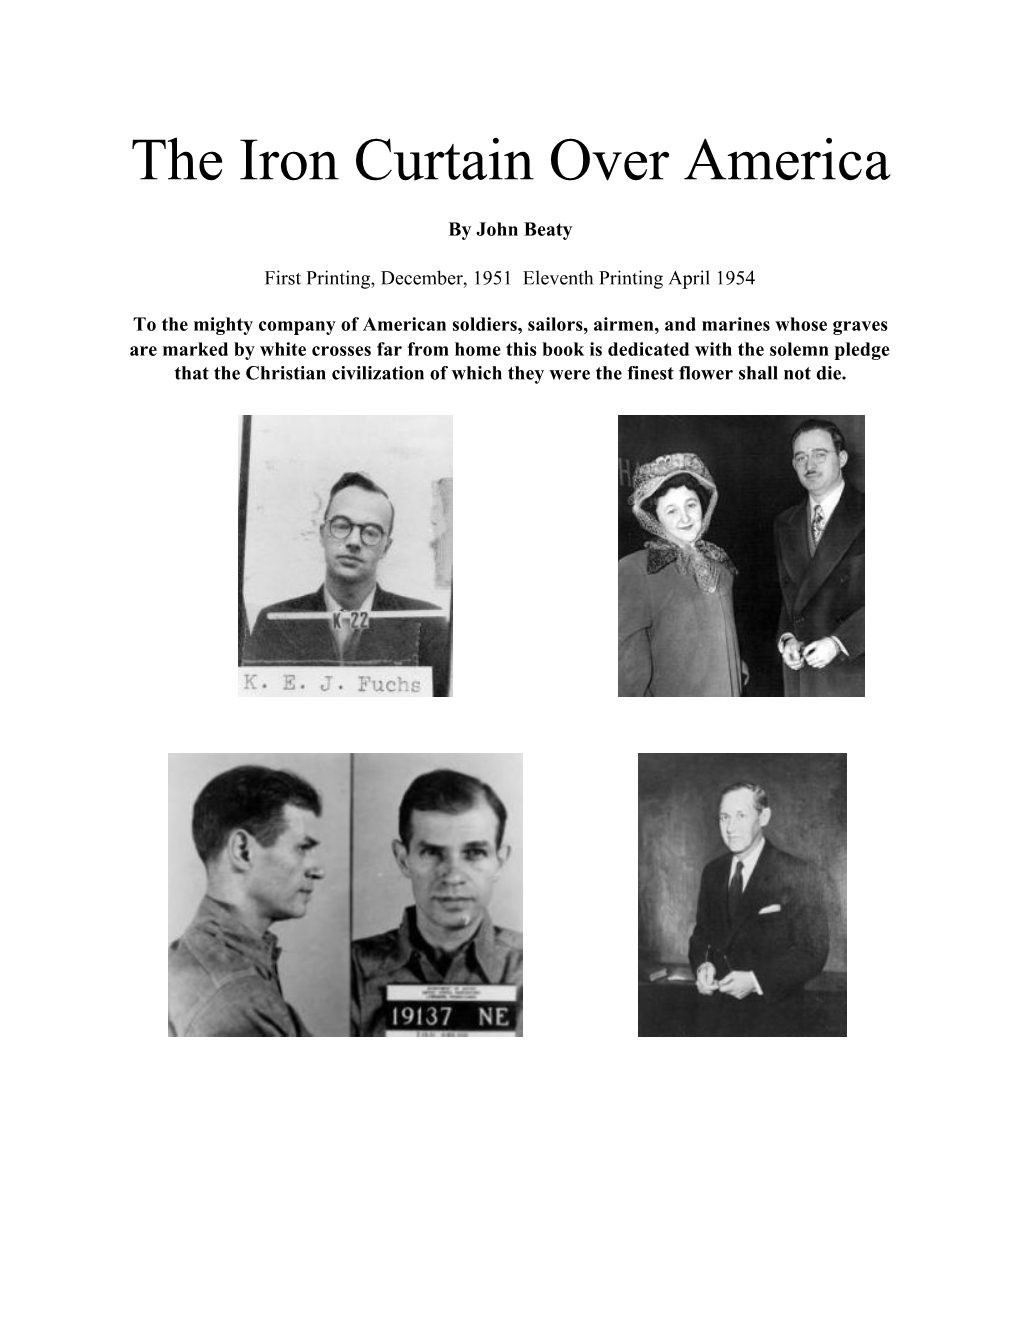 The Iron Curtain Over America